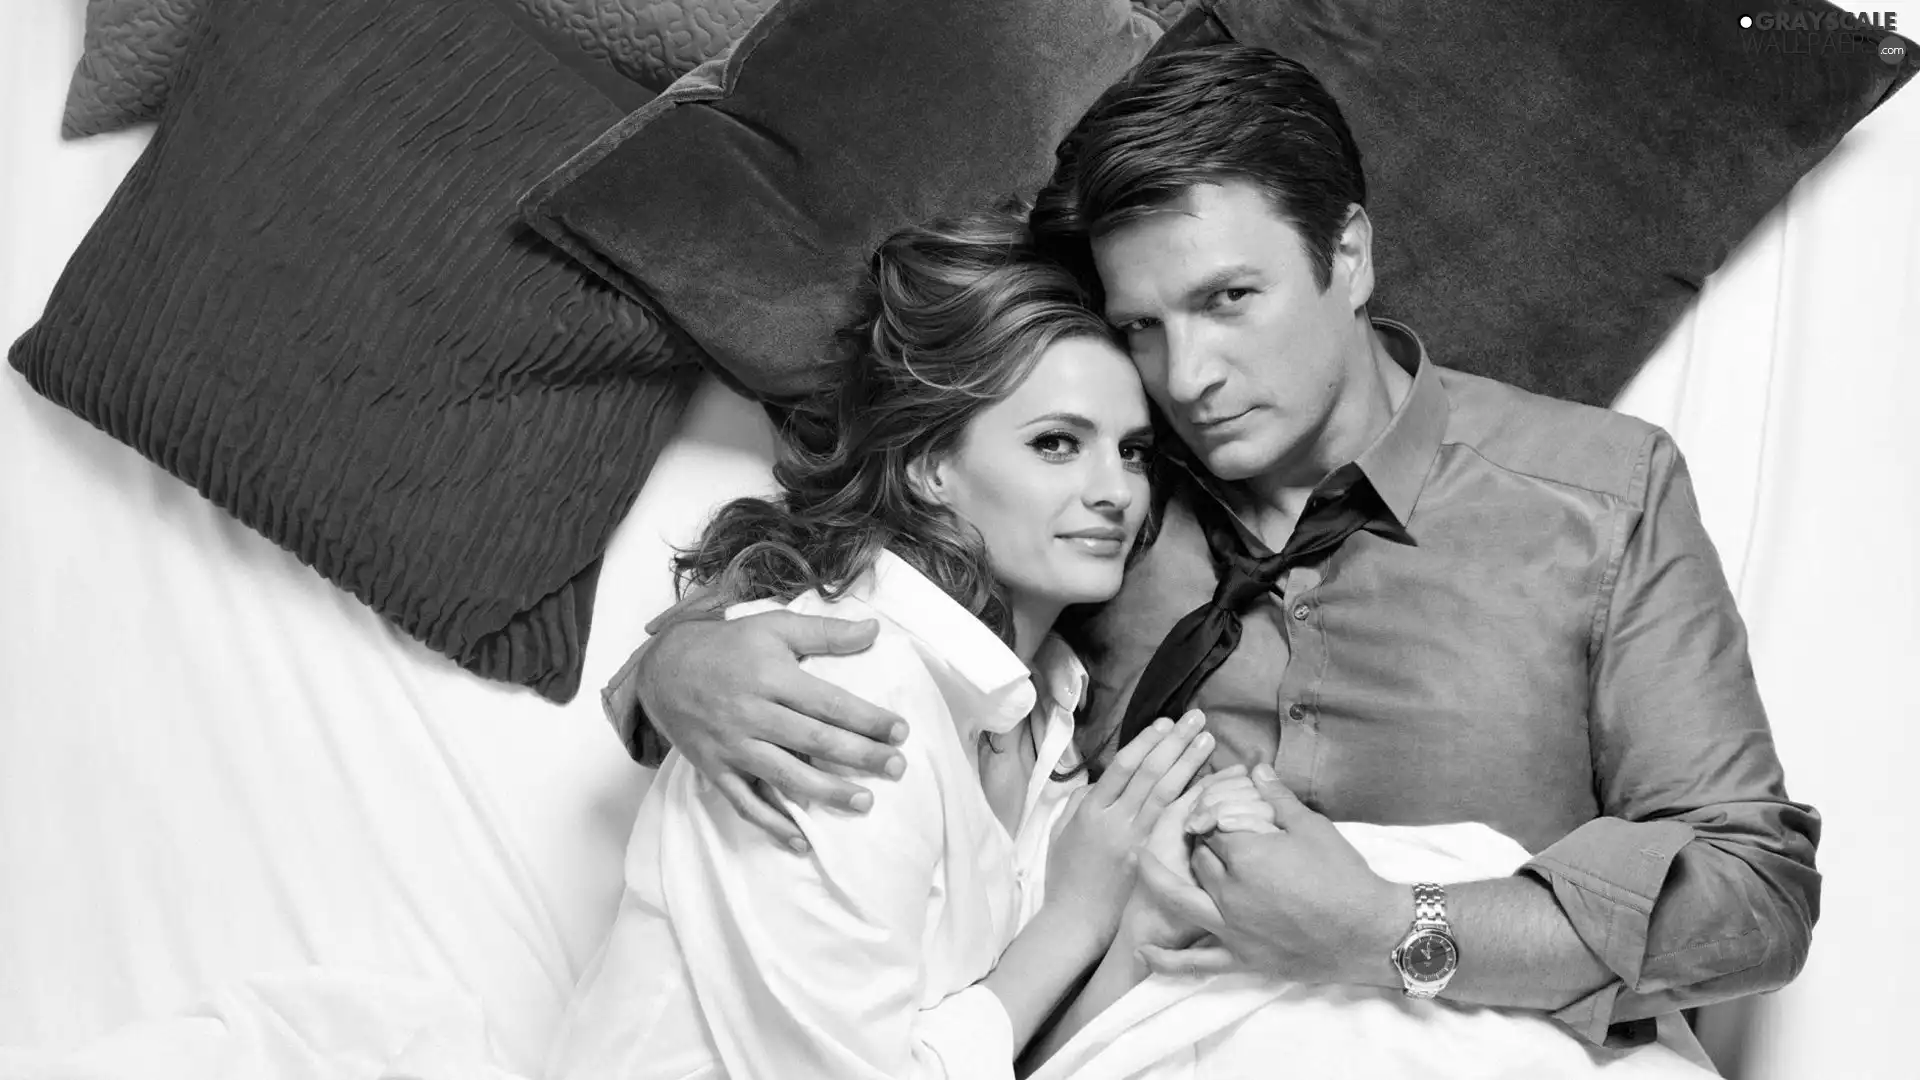 actress, Castle, actor, series, The main characters, Stana Katic, Nathan Fillion